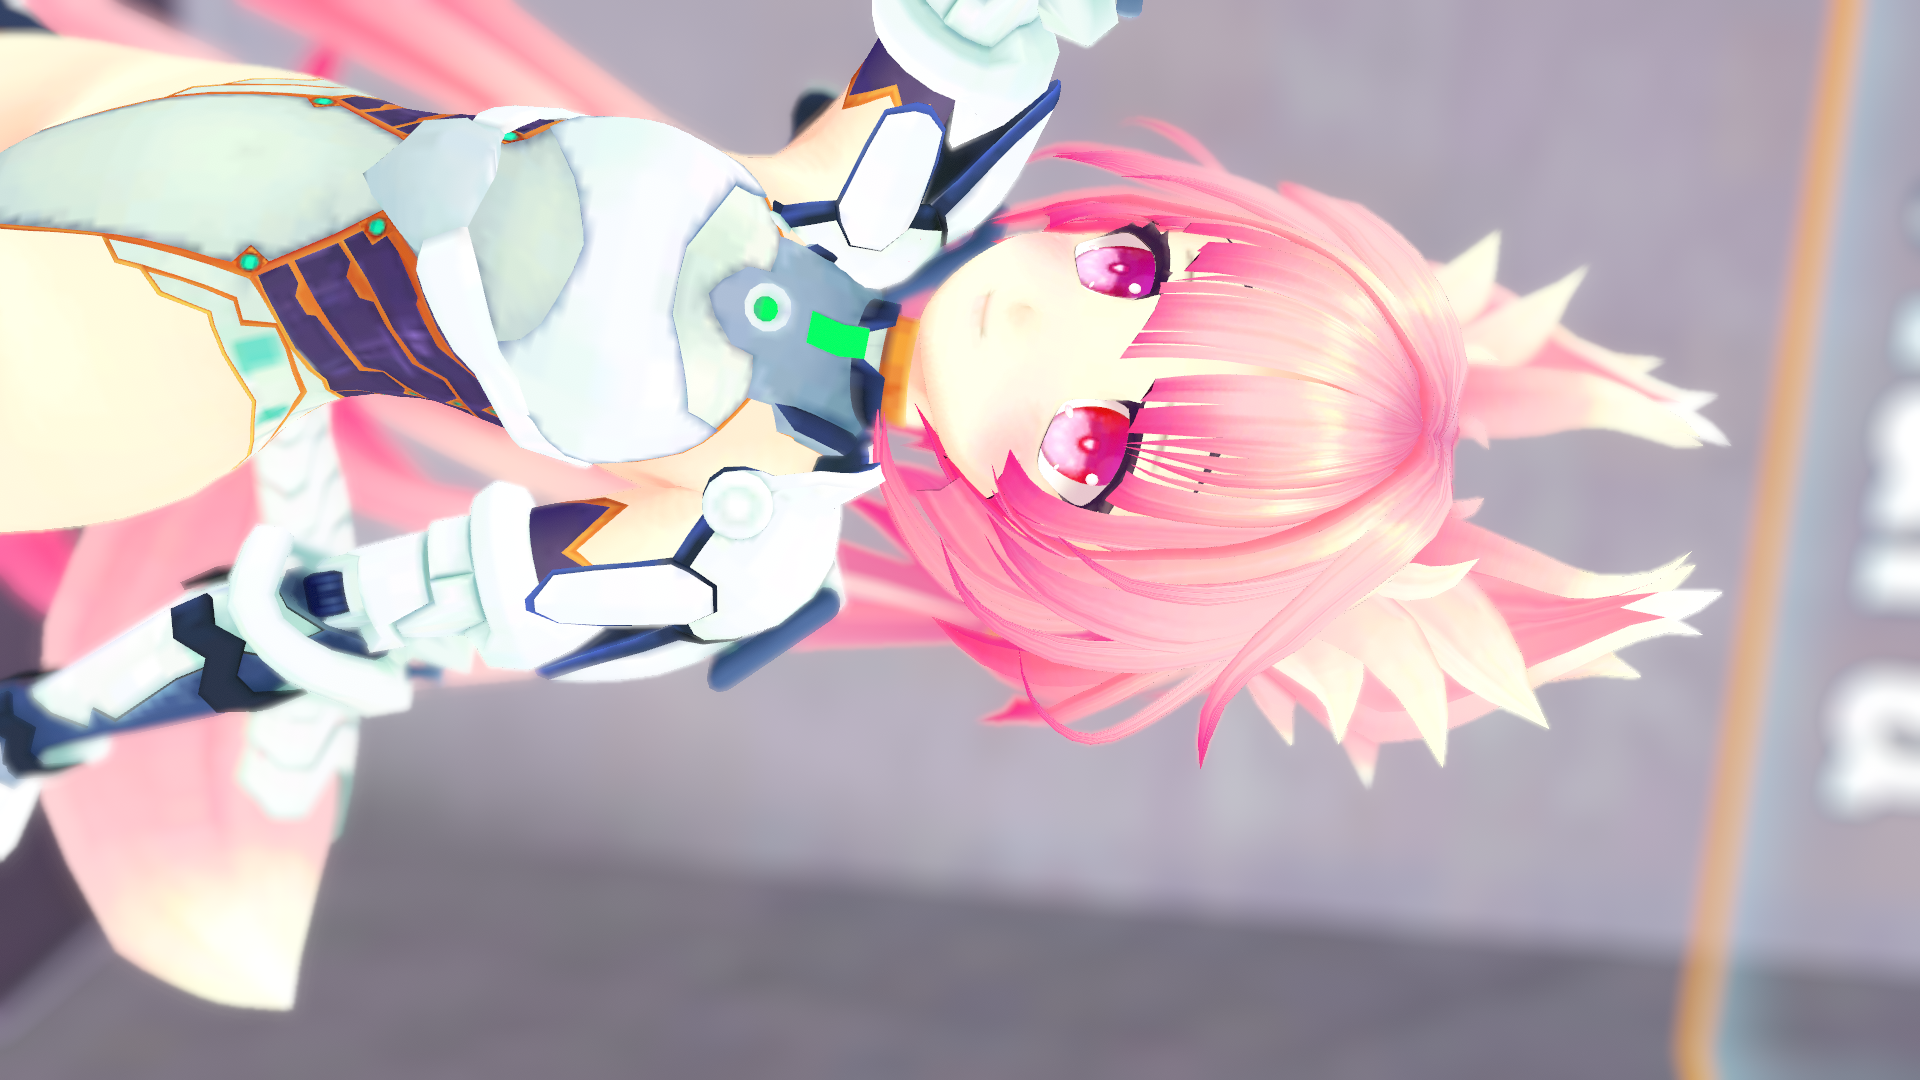 VRChat_1920x1080_2021-12-05_06-04-51.283.png